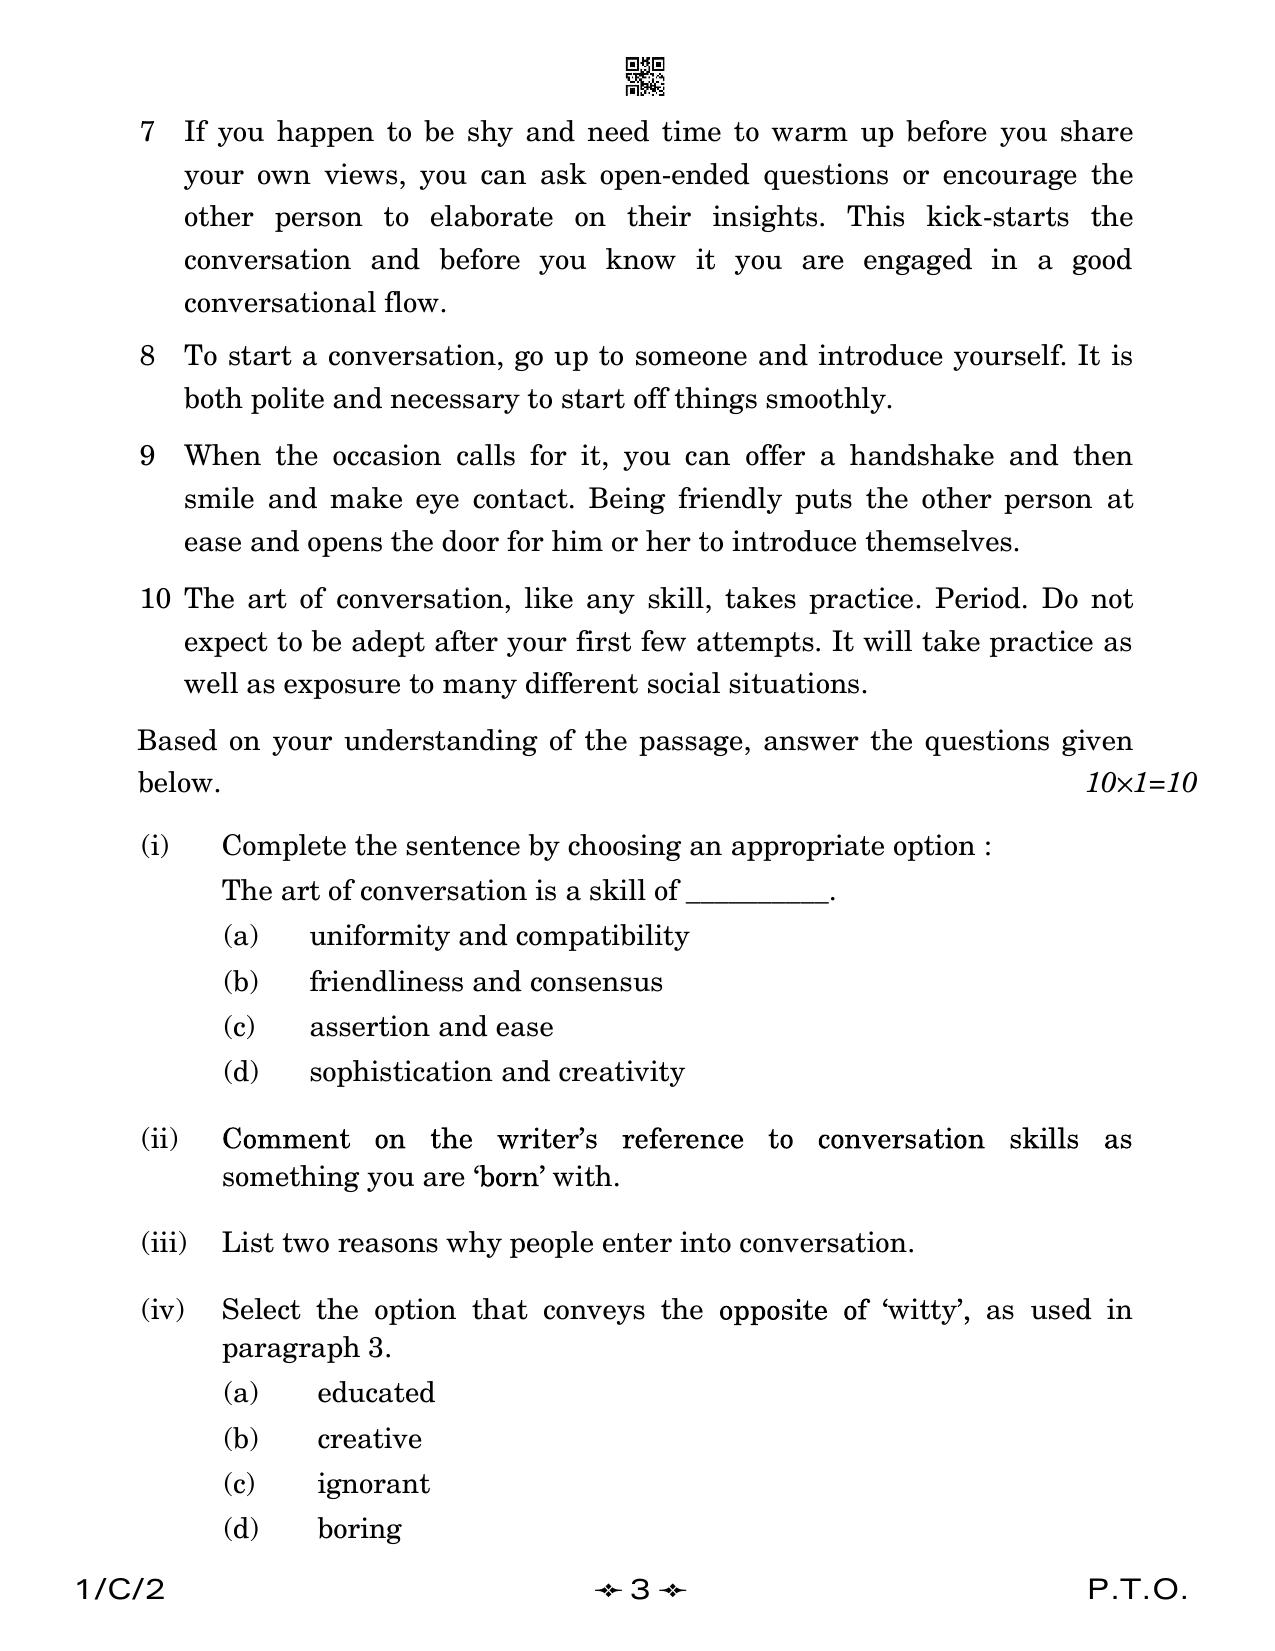 CBSE Class 12 1-2 English Core 2023 (Compartment) Question Paper - Page 3